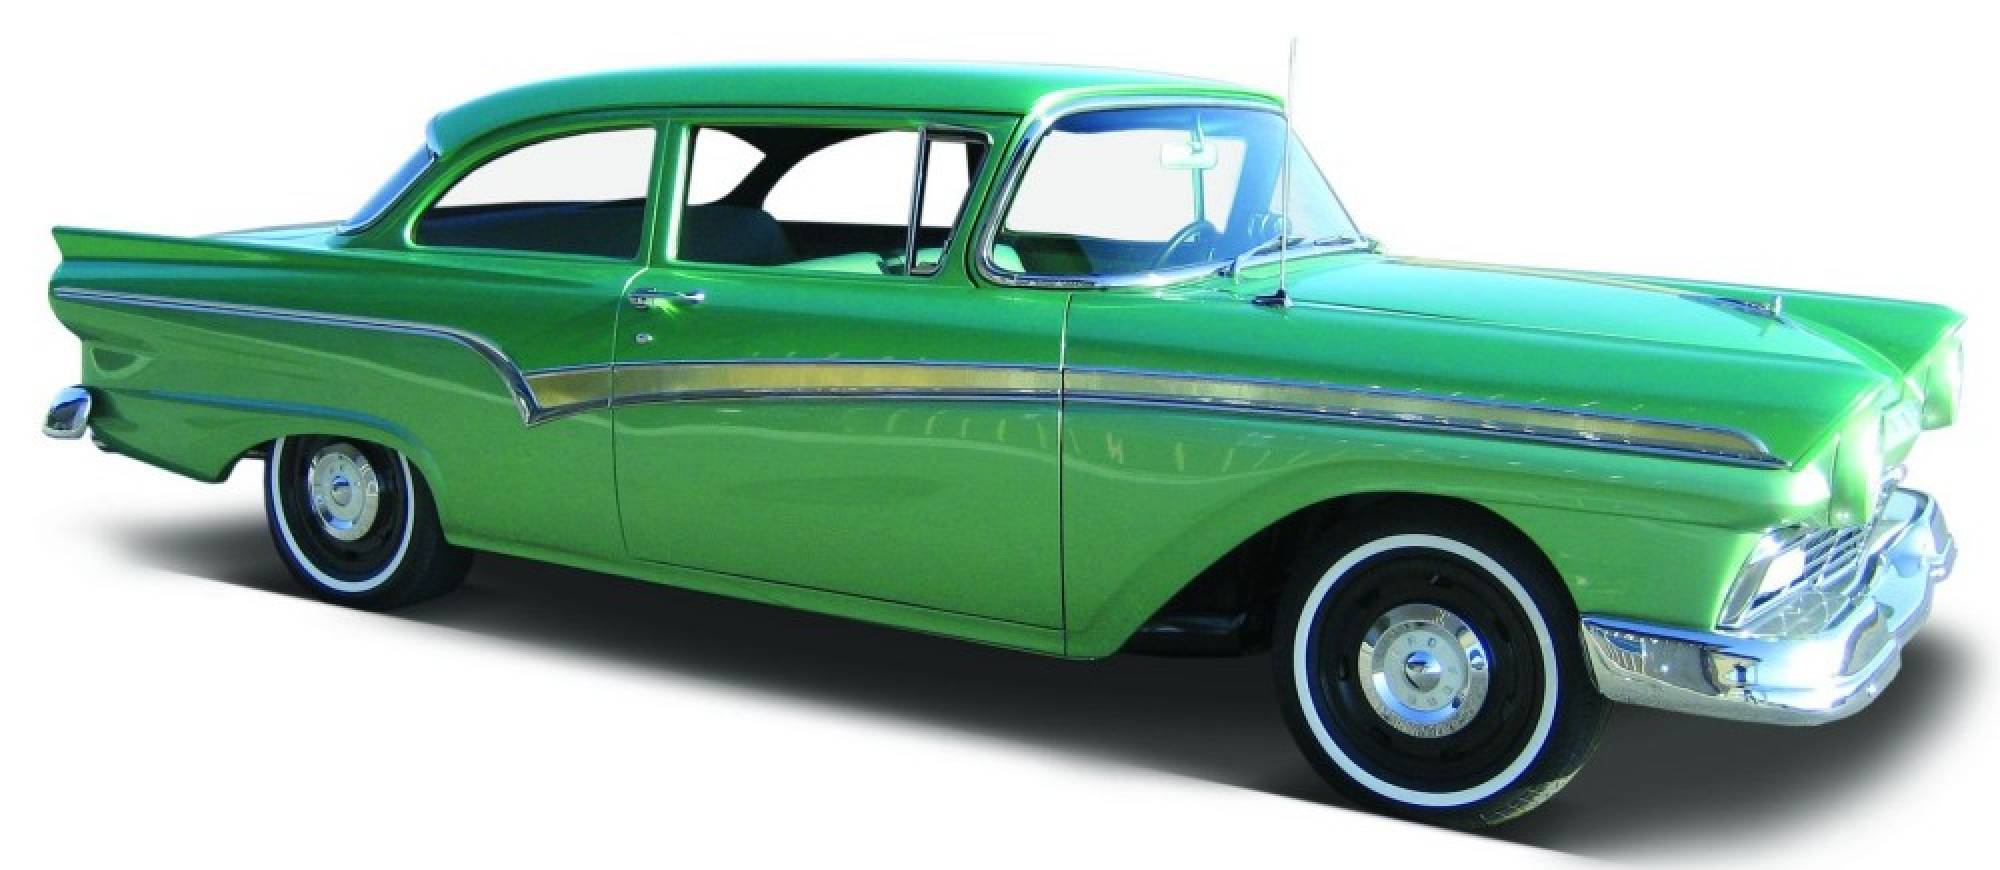 1957 Ford Custom Backgrounds, Compatible - PC, Mobile, Gadgets| 2000x870 px